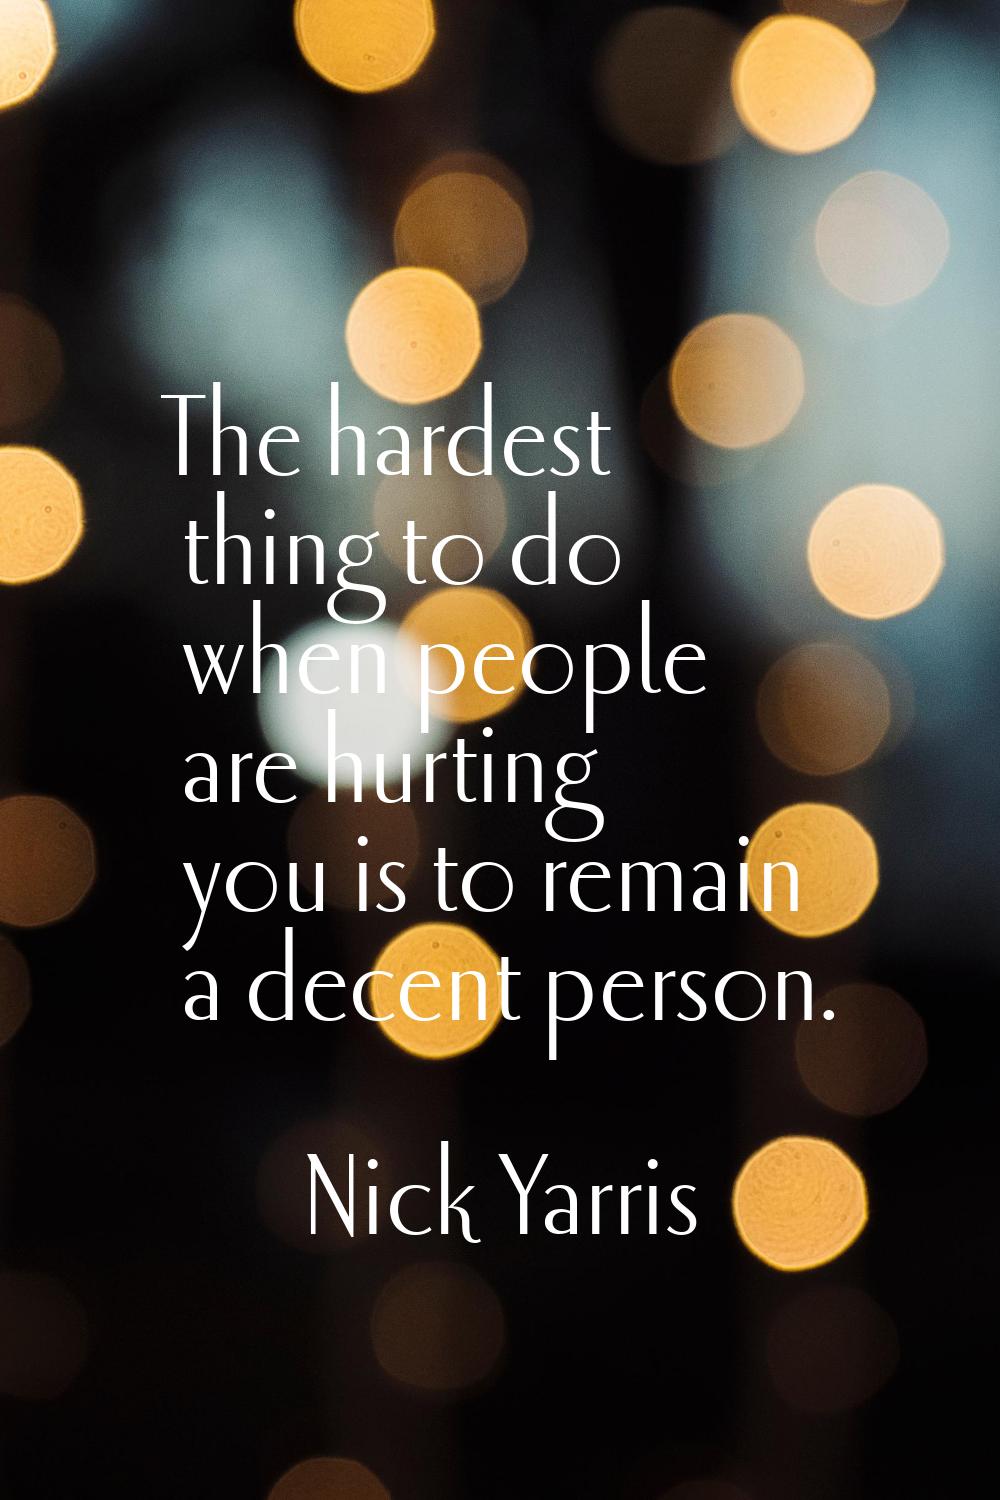 The hardest thing to do when people are hurting you is to remain a decent person.